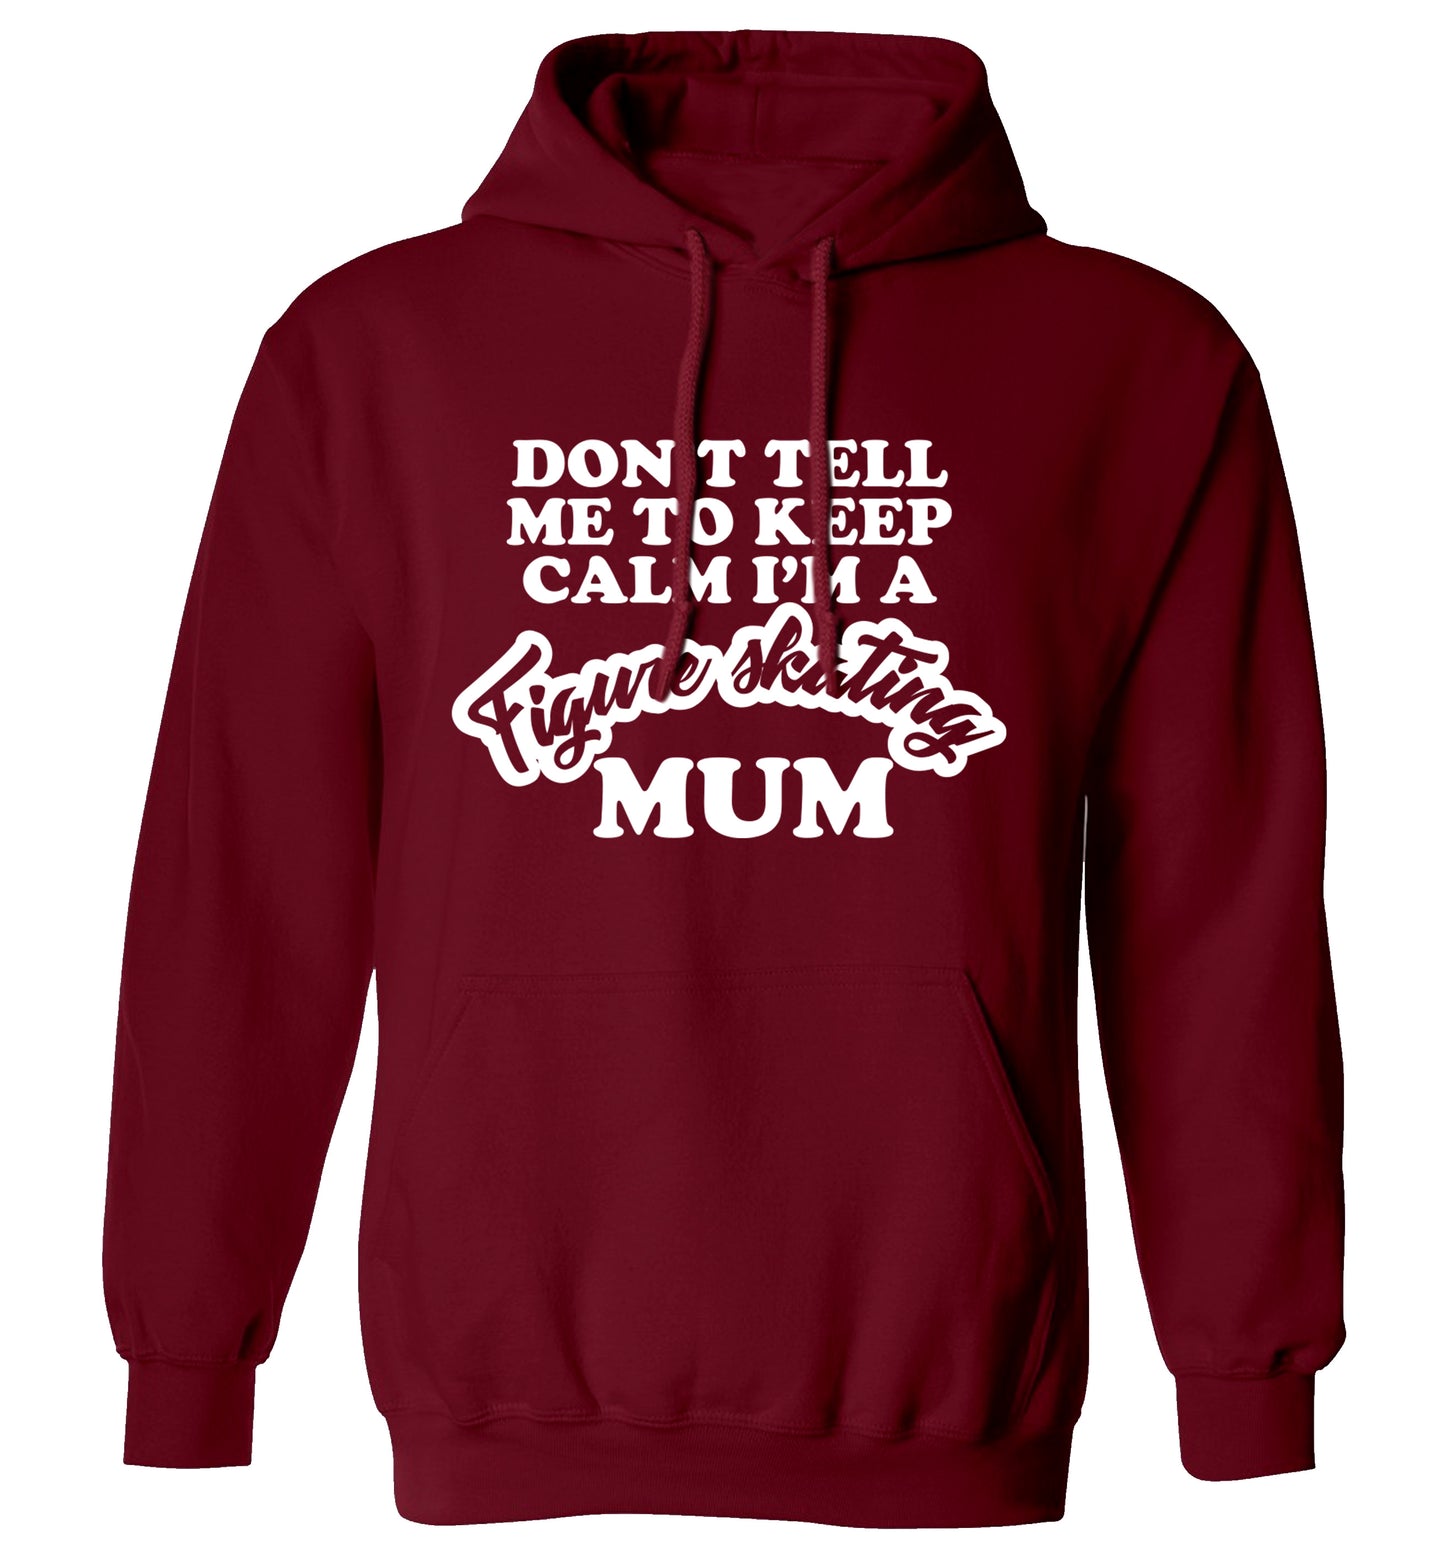 Don't tell me to keep calm I'm a figure skating mum adults unisexmaroon hoodie 2XL